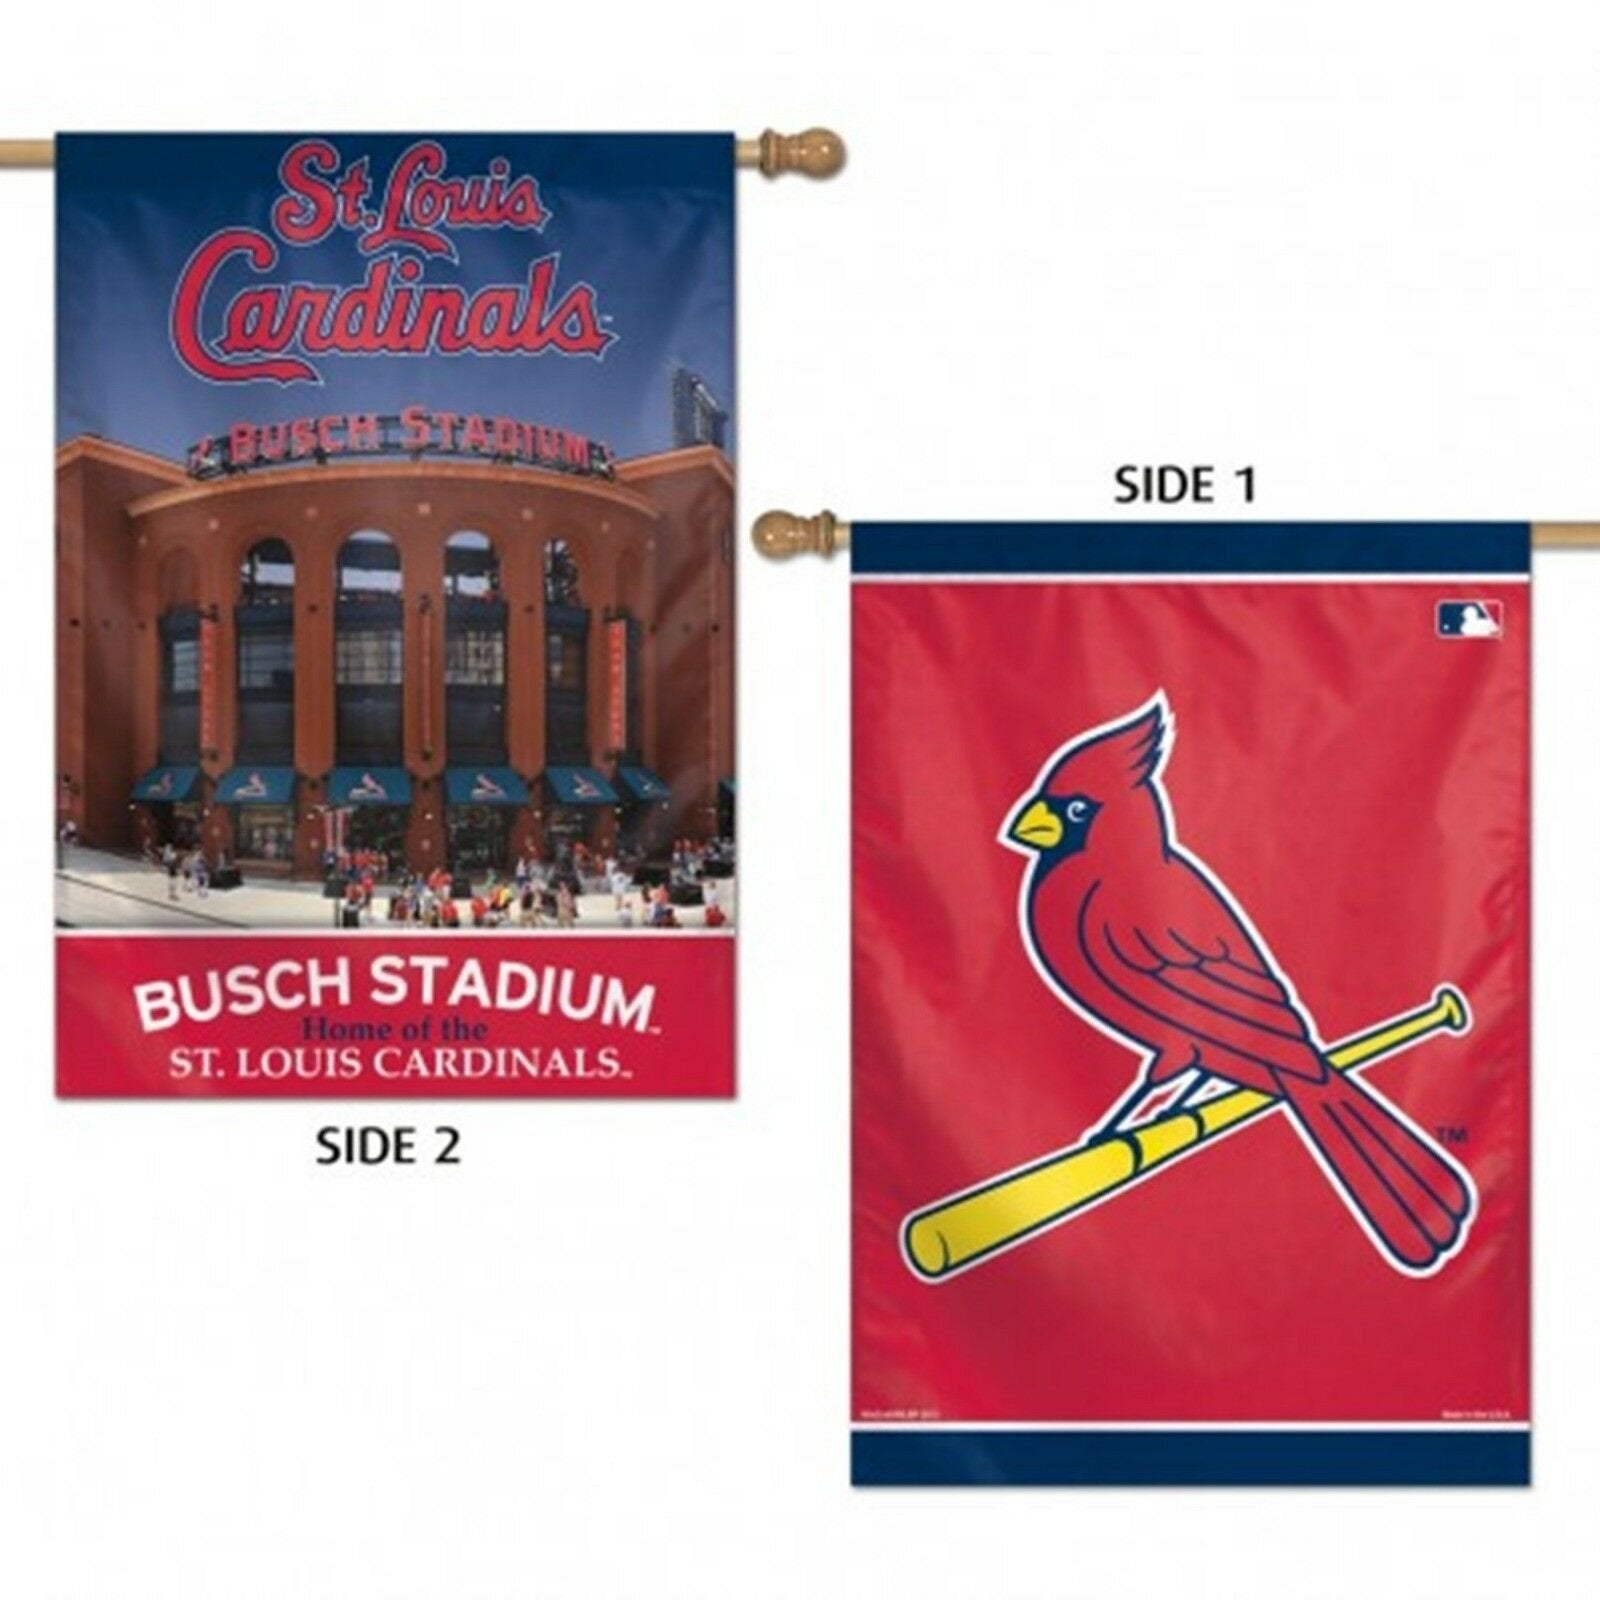 St Louis Cardinals WC Premium 2-sided 28x40 Banner Outdoor House Flag Baseball